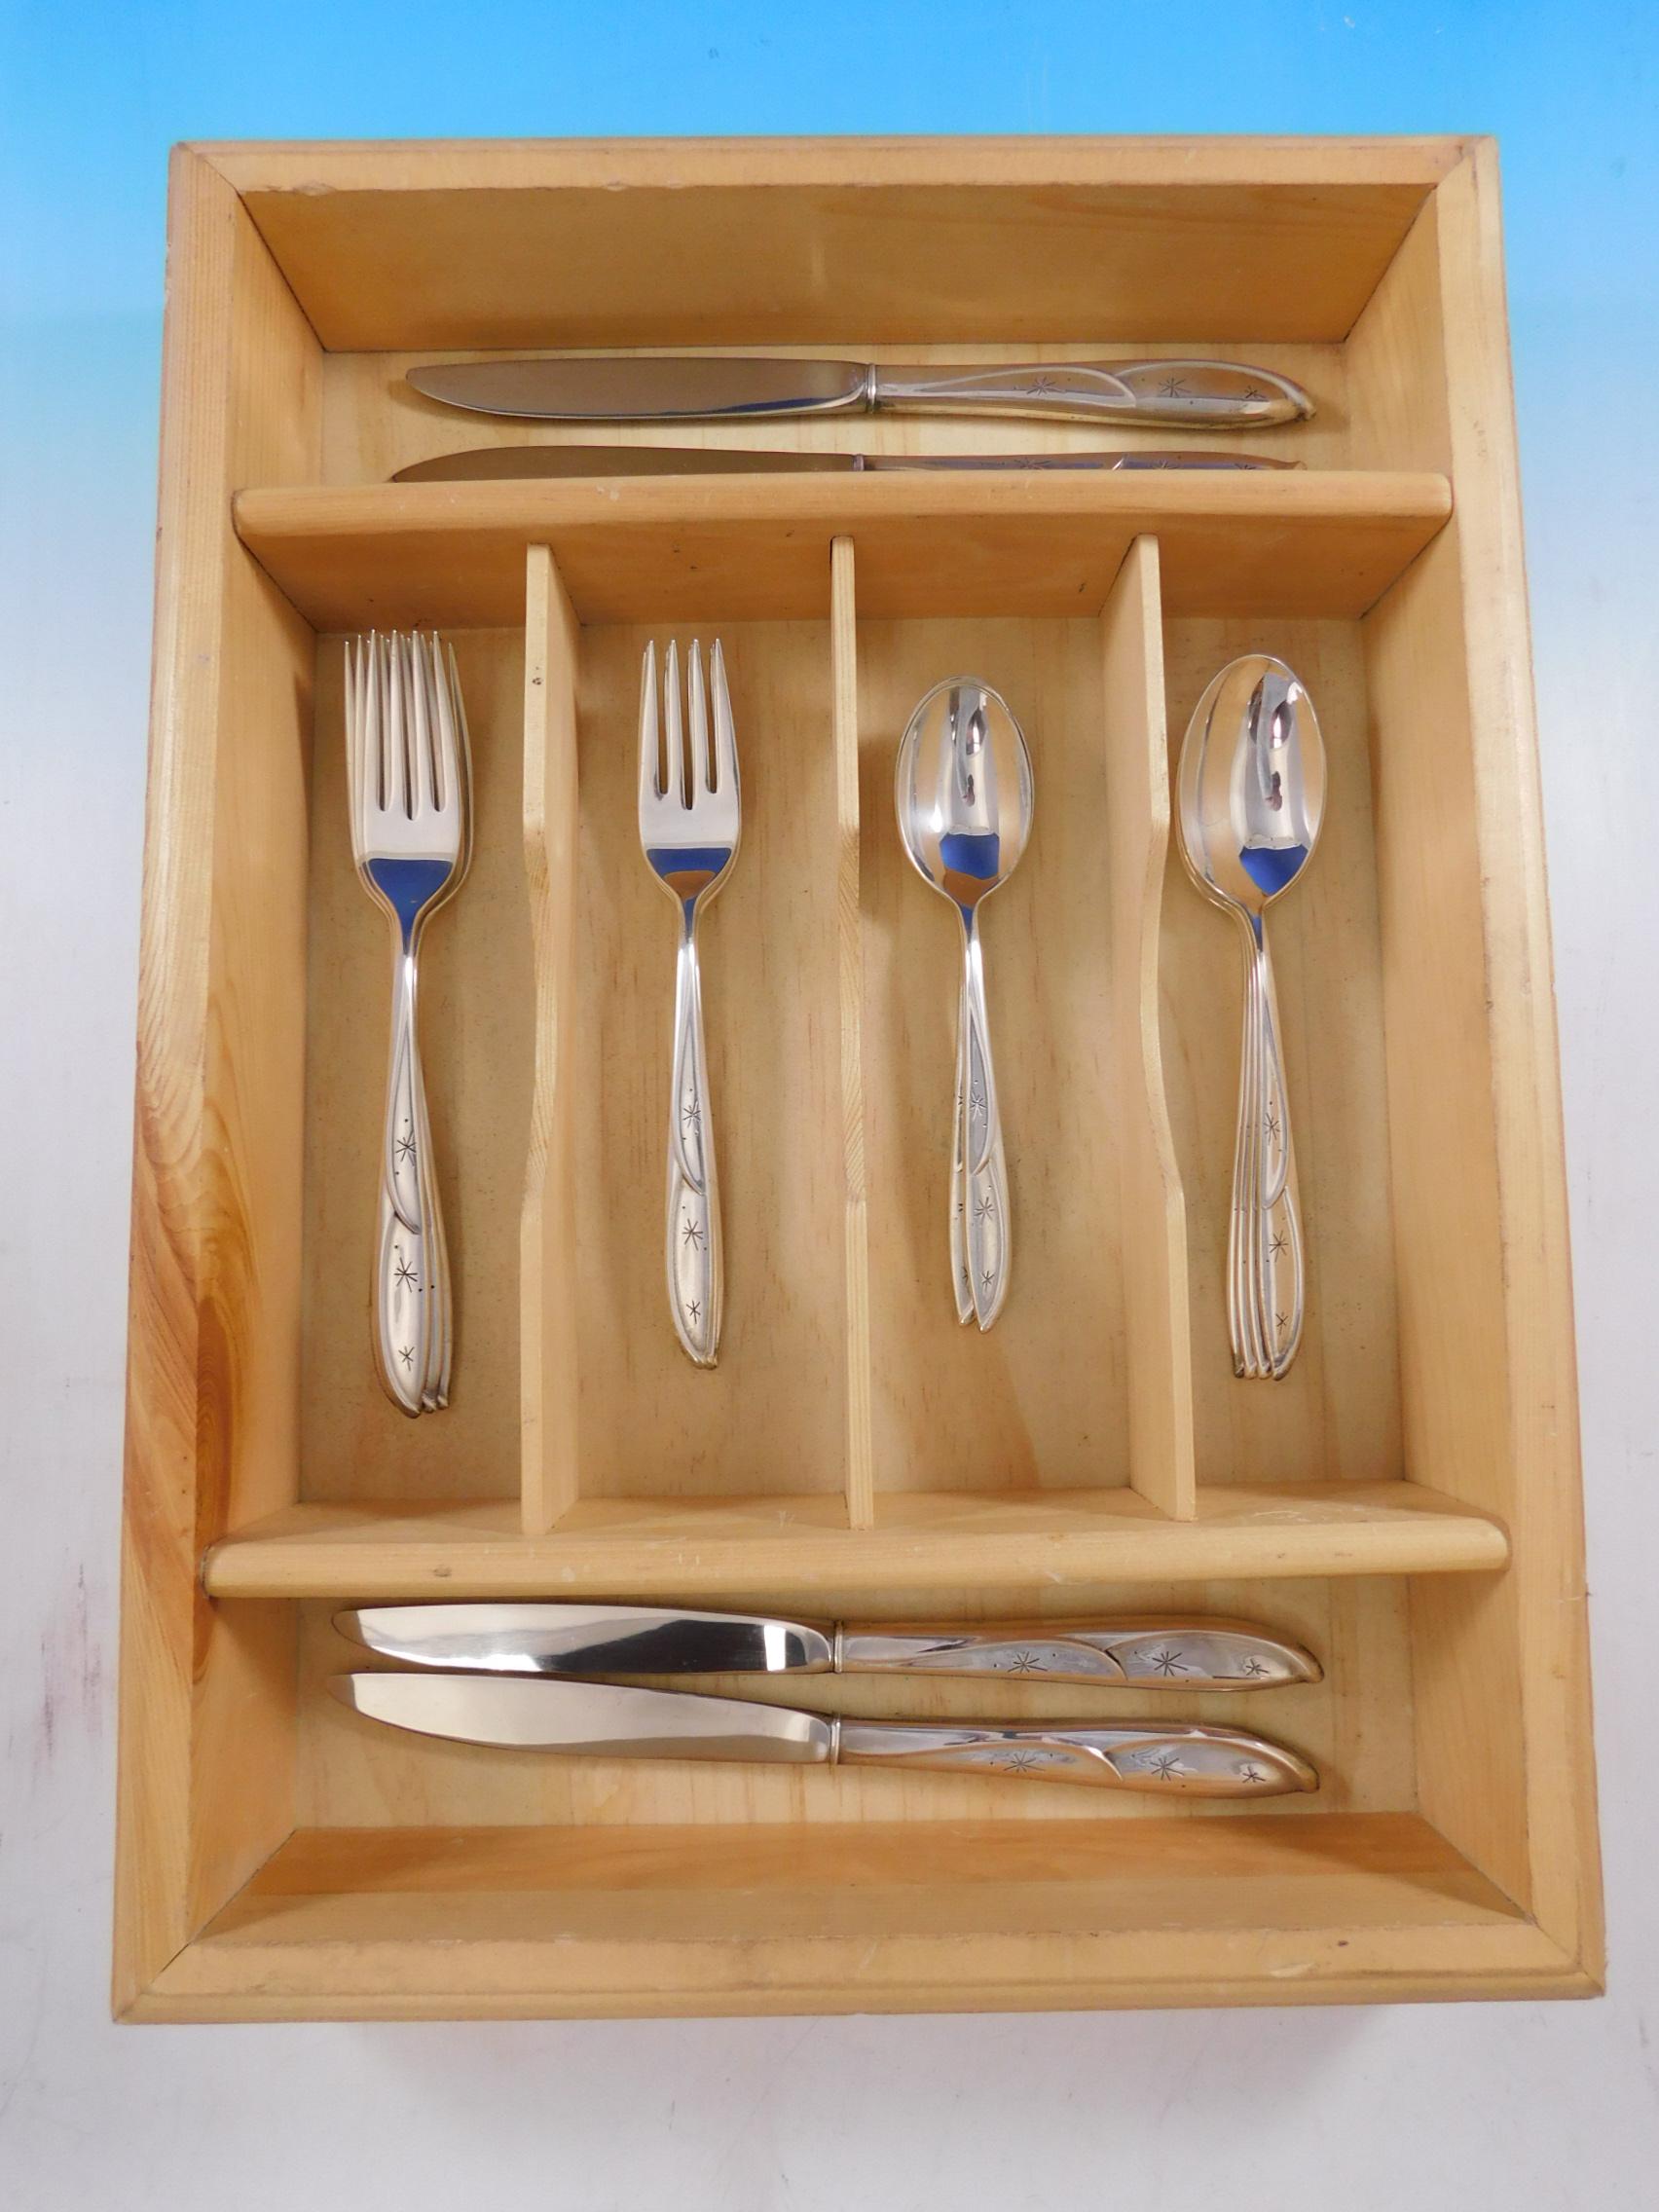 Mid-Century Modern Romance of the Stars by International, circa 1959, sterling silver flatware set - 20 pieces. This set includes:

4 knives, 9 1/8